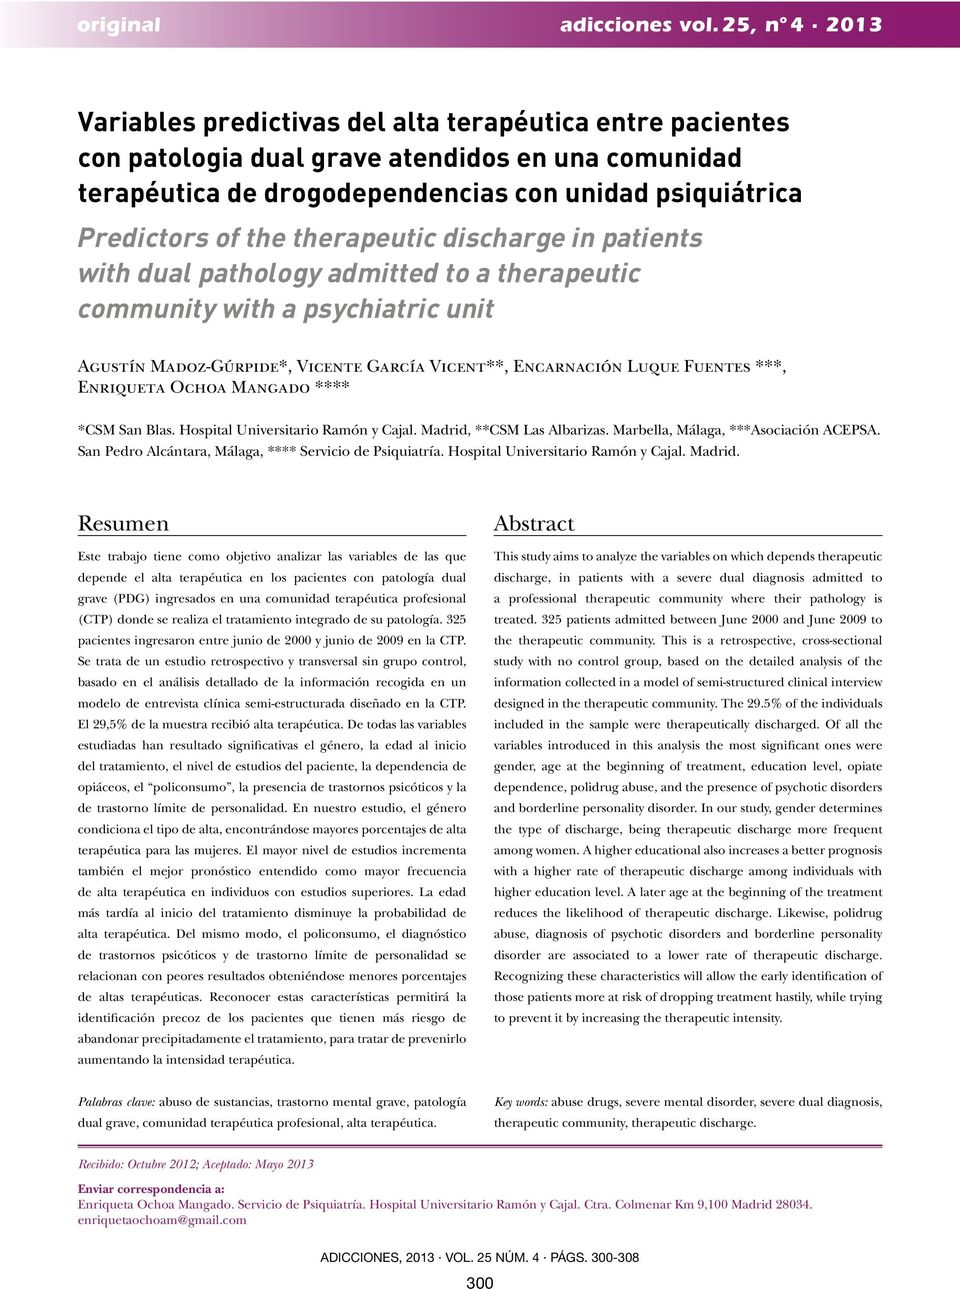 therapeutic discharge in patients with dual pathology admitted to a therapeutic community with a psychiatric unit Agustín Madoz-Gúrpide*, Vicente García Vicent**, Encarnación Luque Fuentes ***,